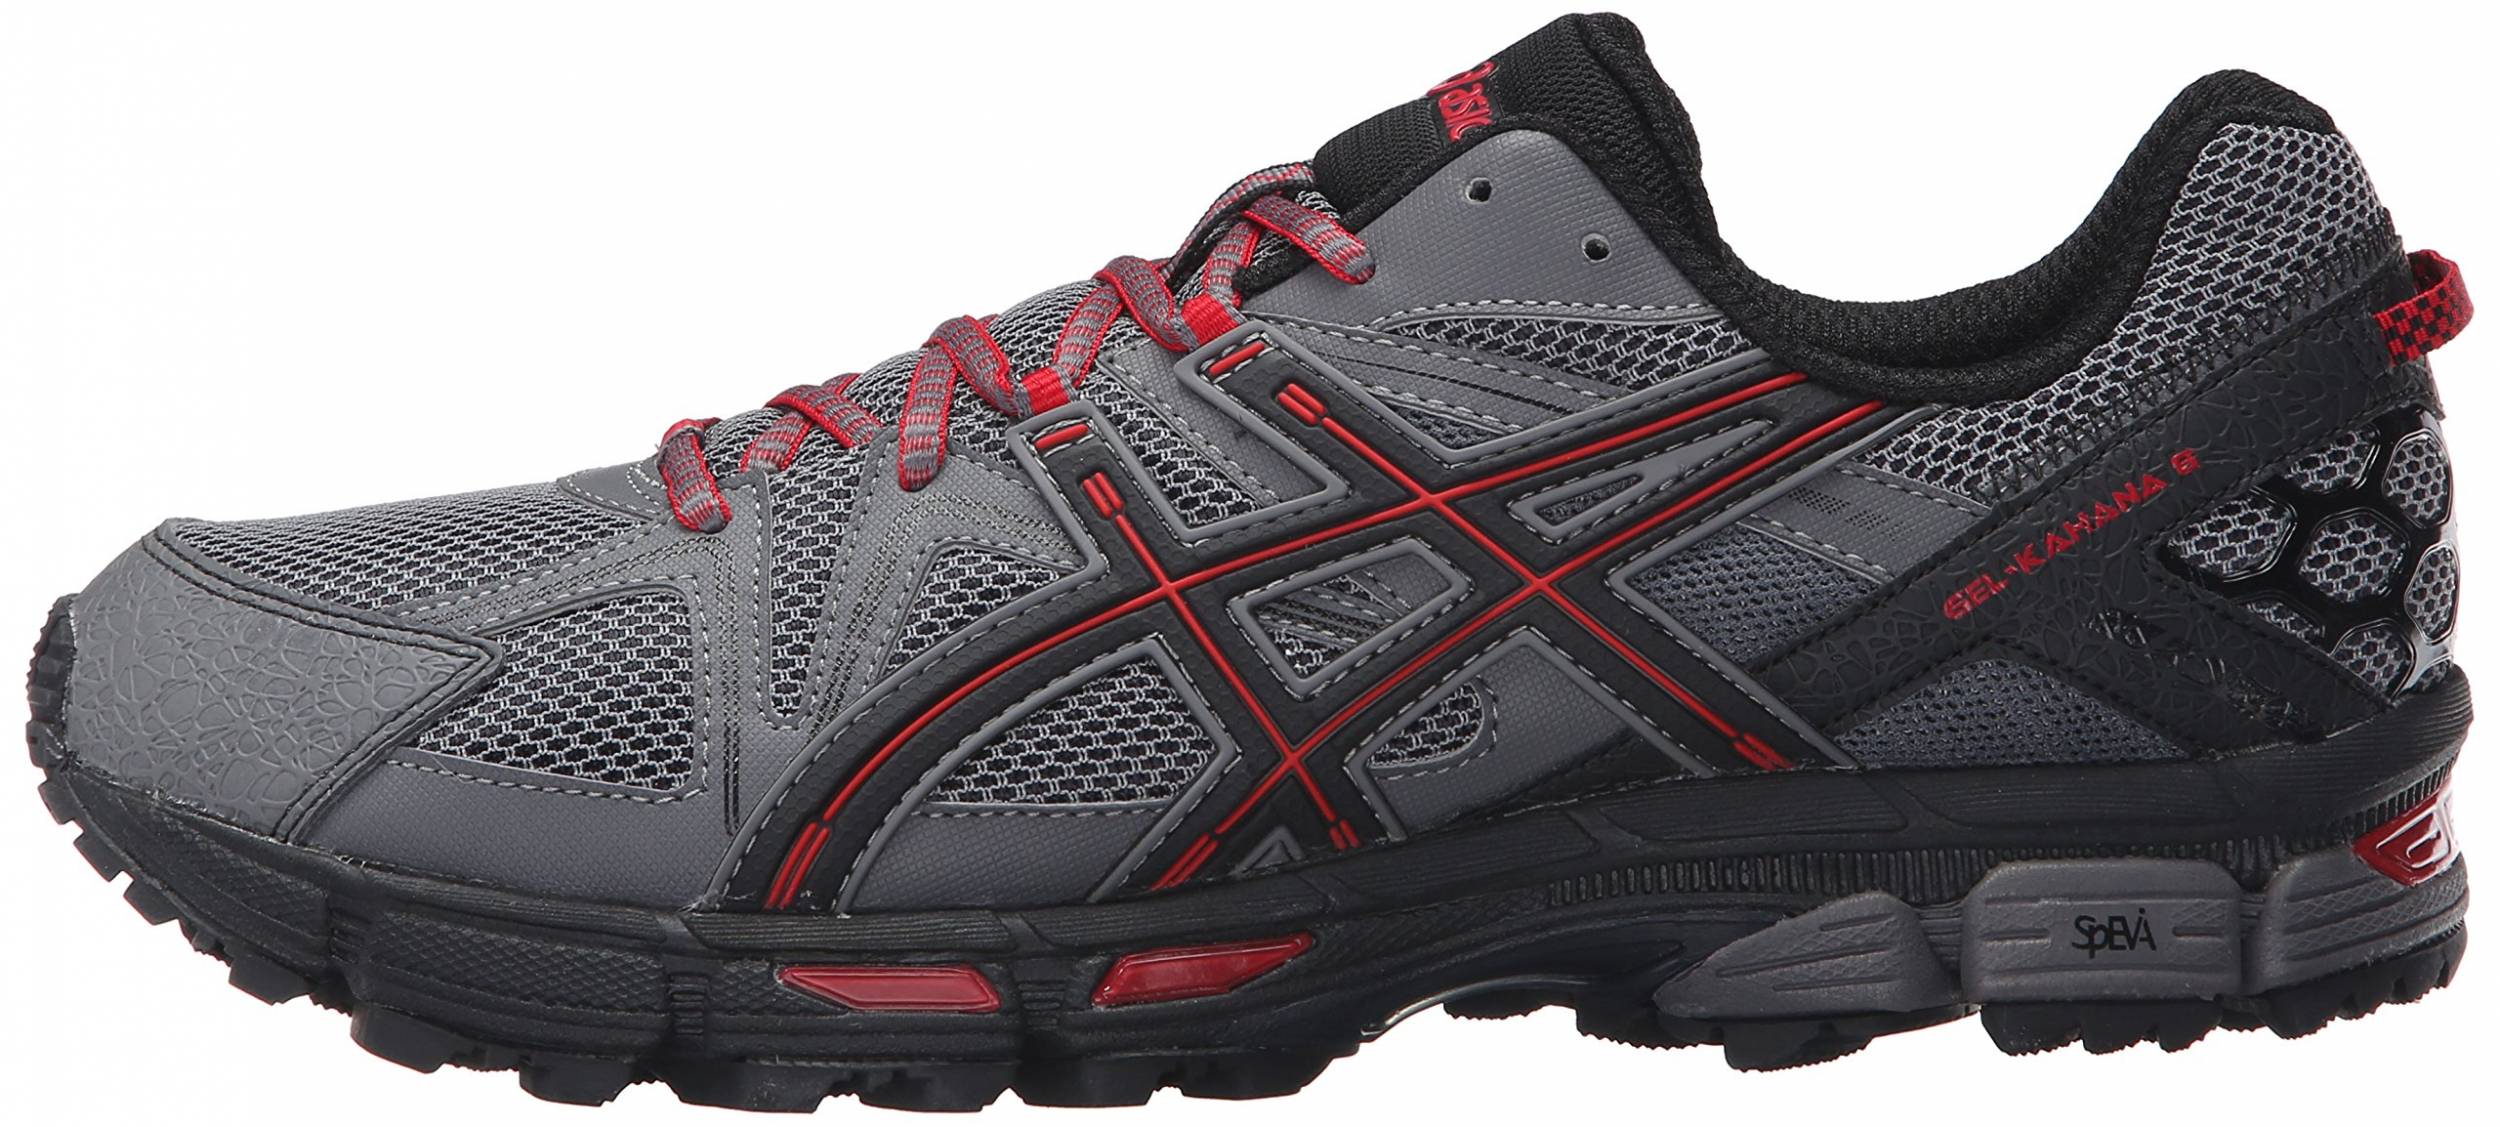 asics hiking shoes review